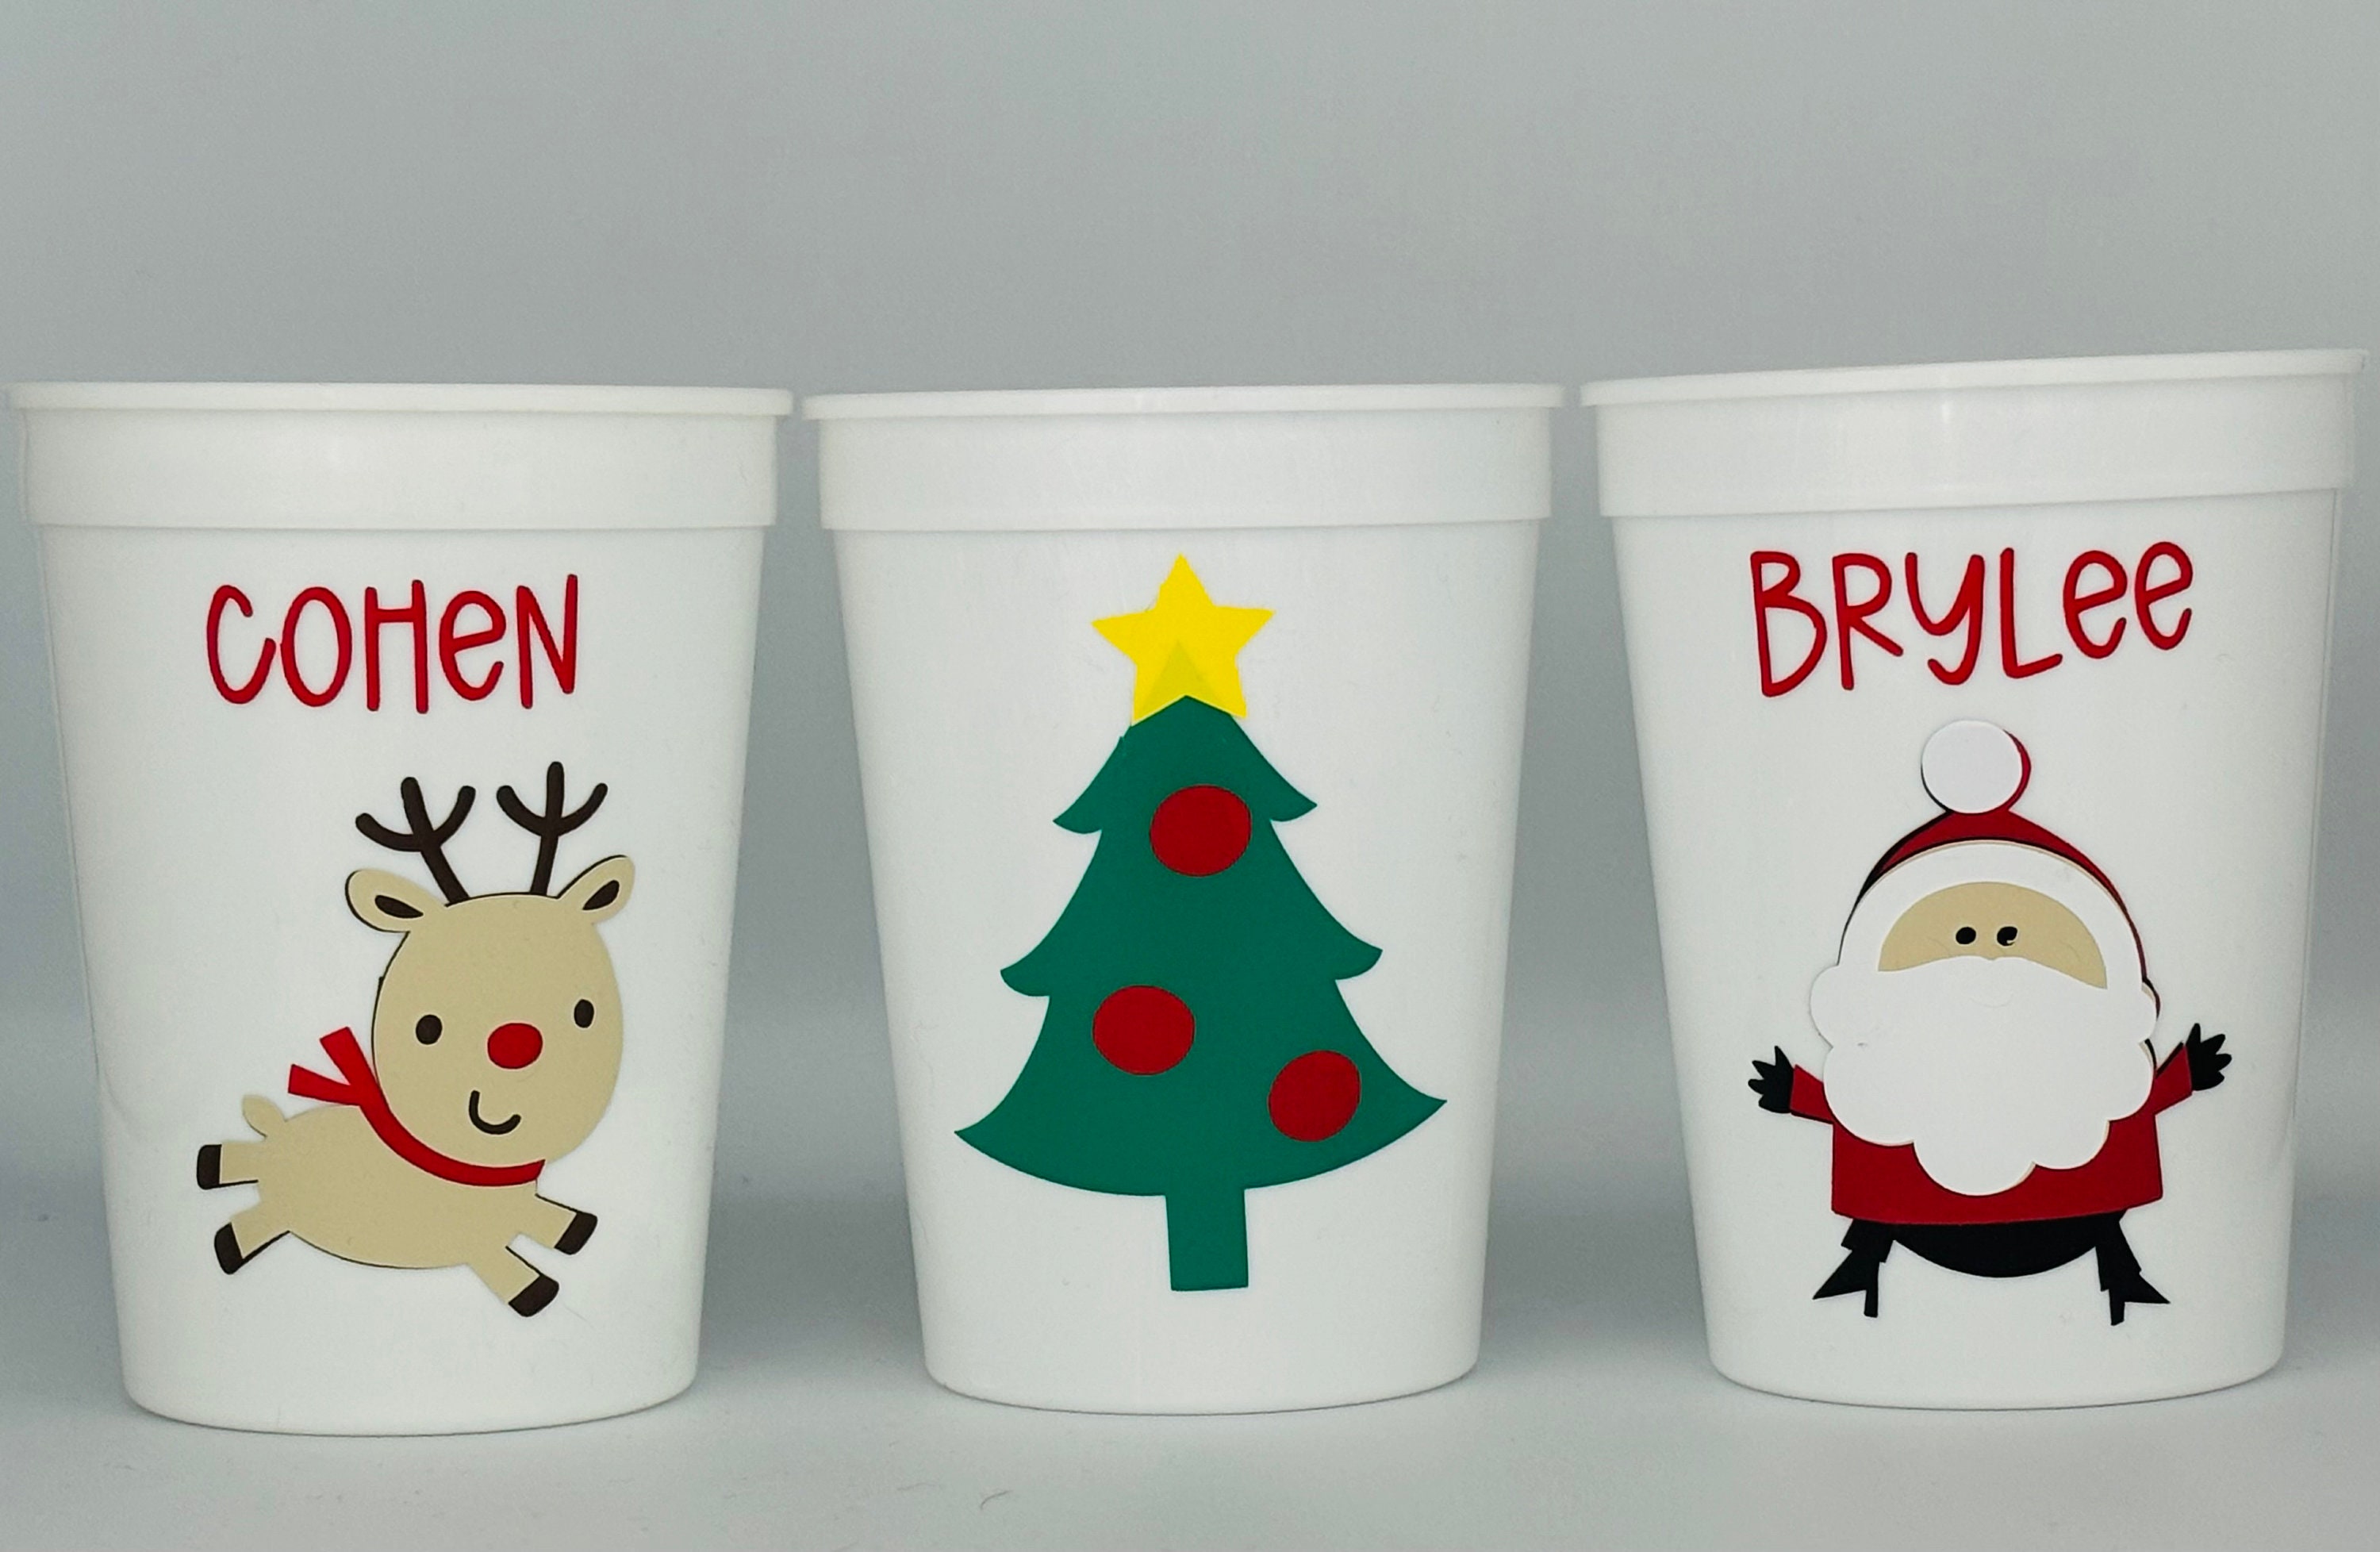 Reindeer Party Cups, Nutcracker, Elf, Set of Christmas Party Cups